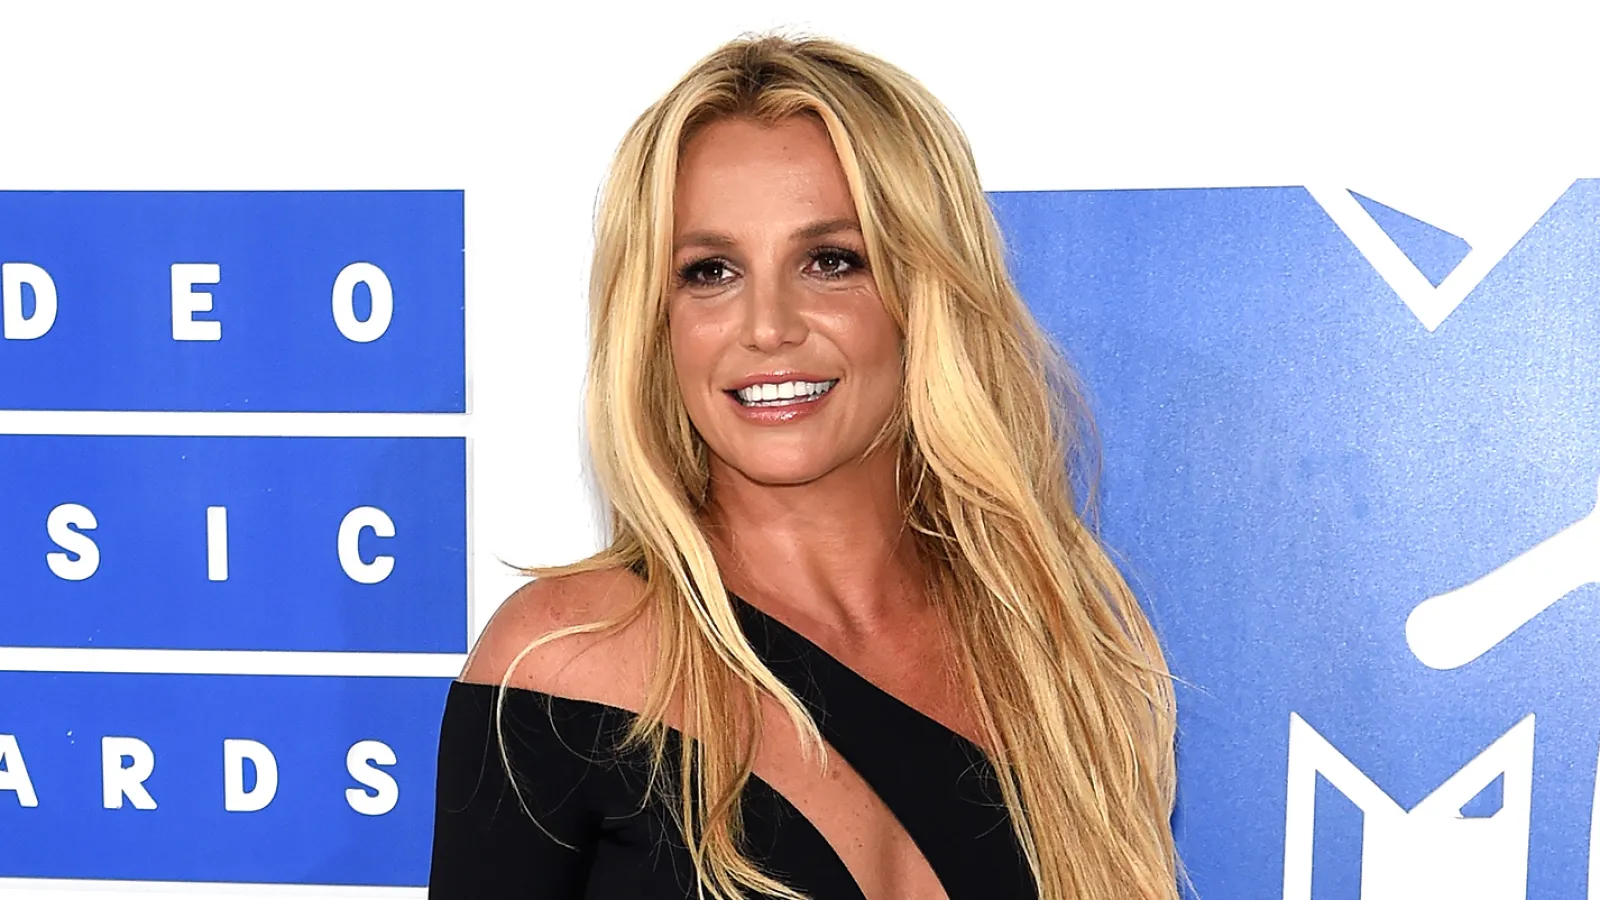 Britney Spears and Her Estranged Father Have Settled Their Legal Dispute, Ending Their Conservatorship